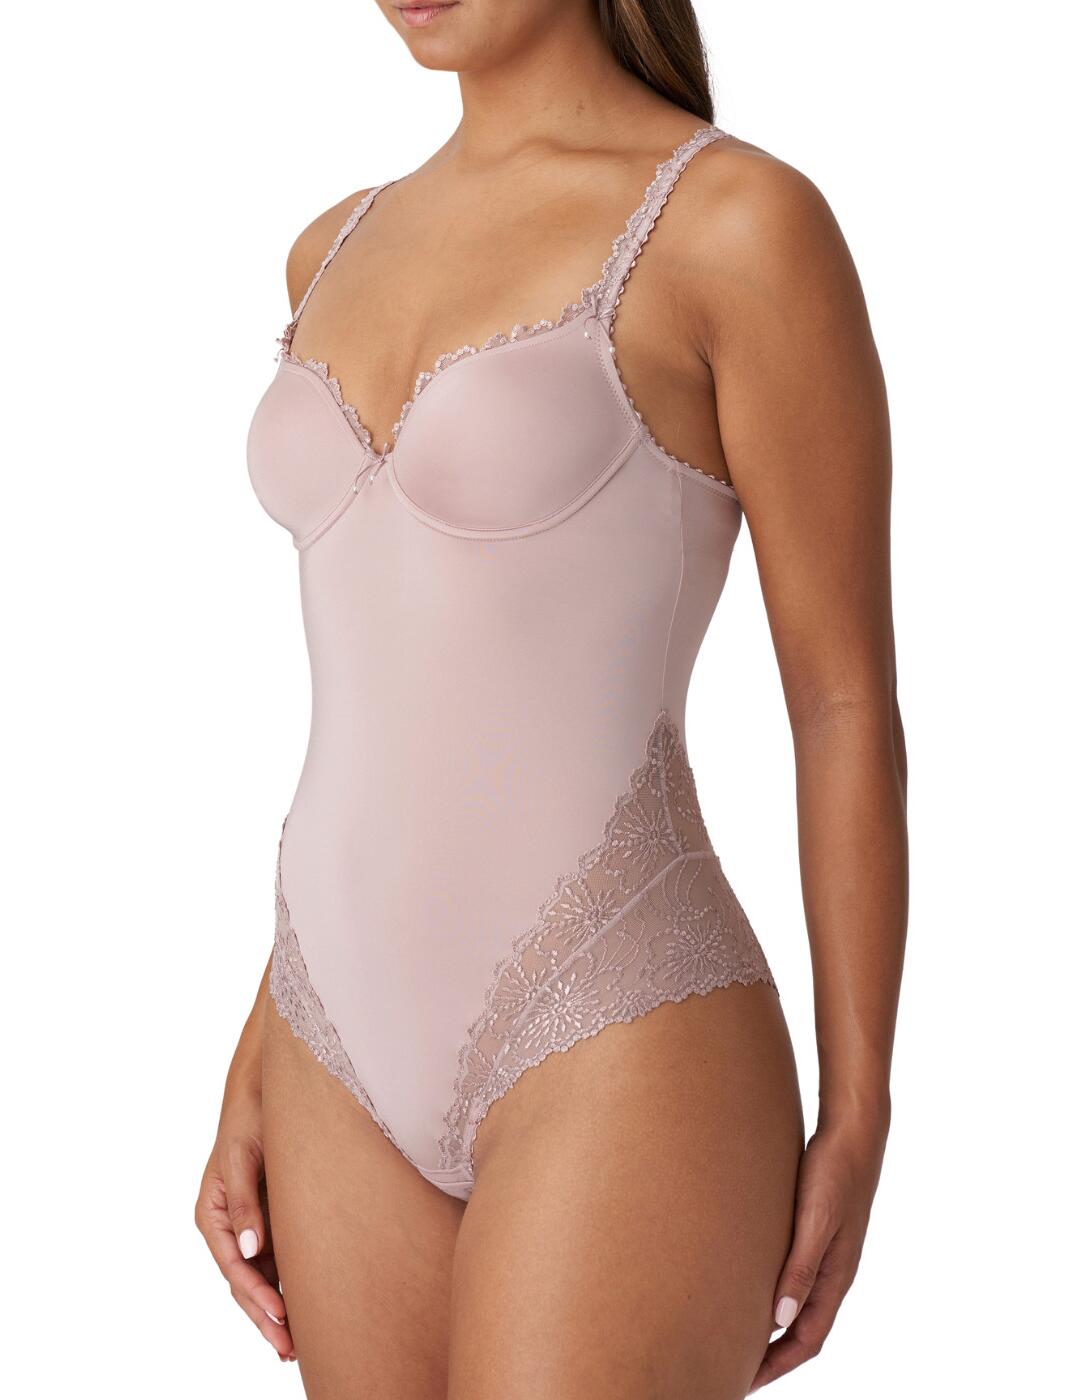 Pour Moi Statement Padded Underwired Body